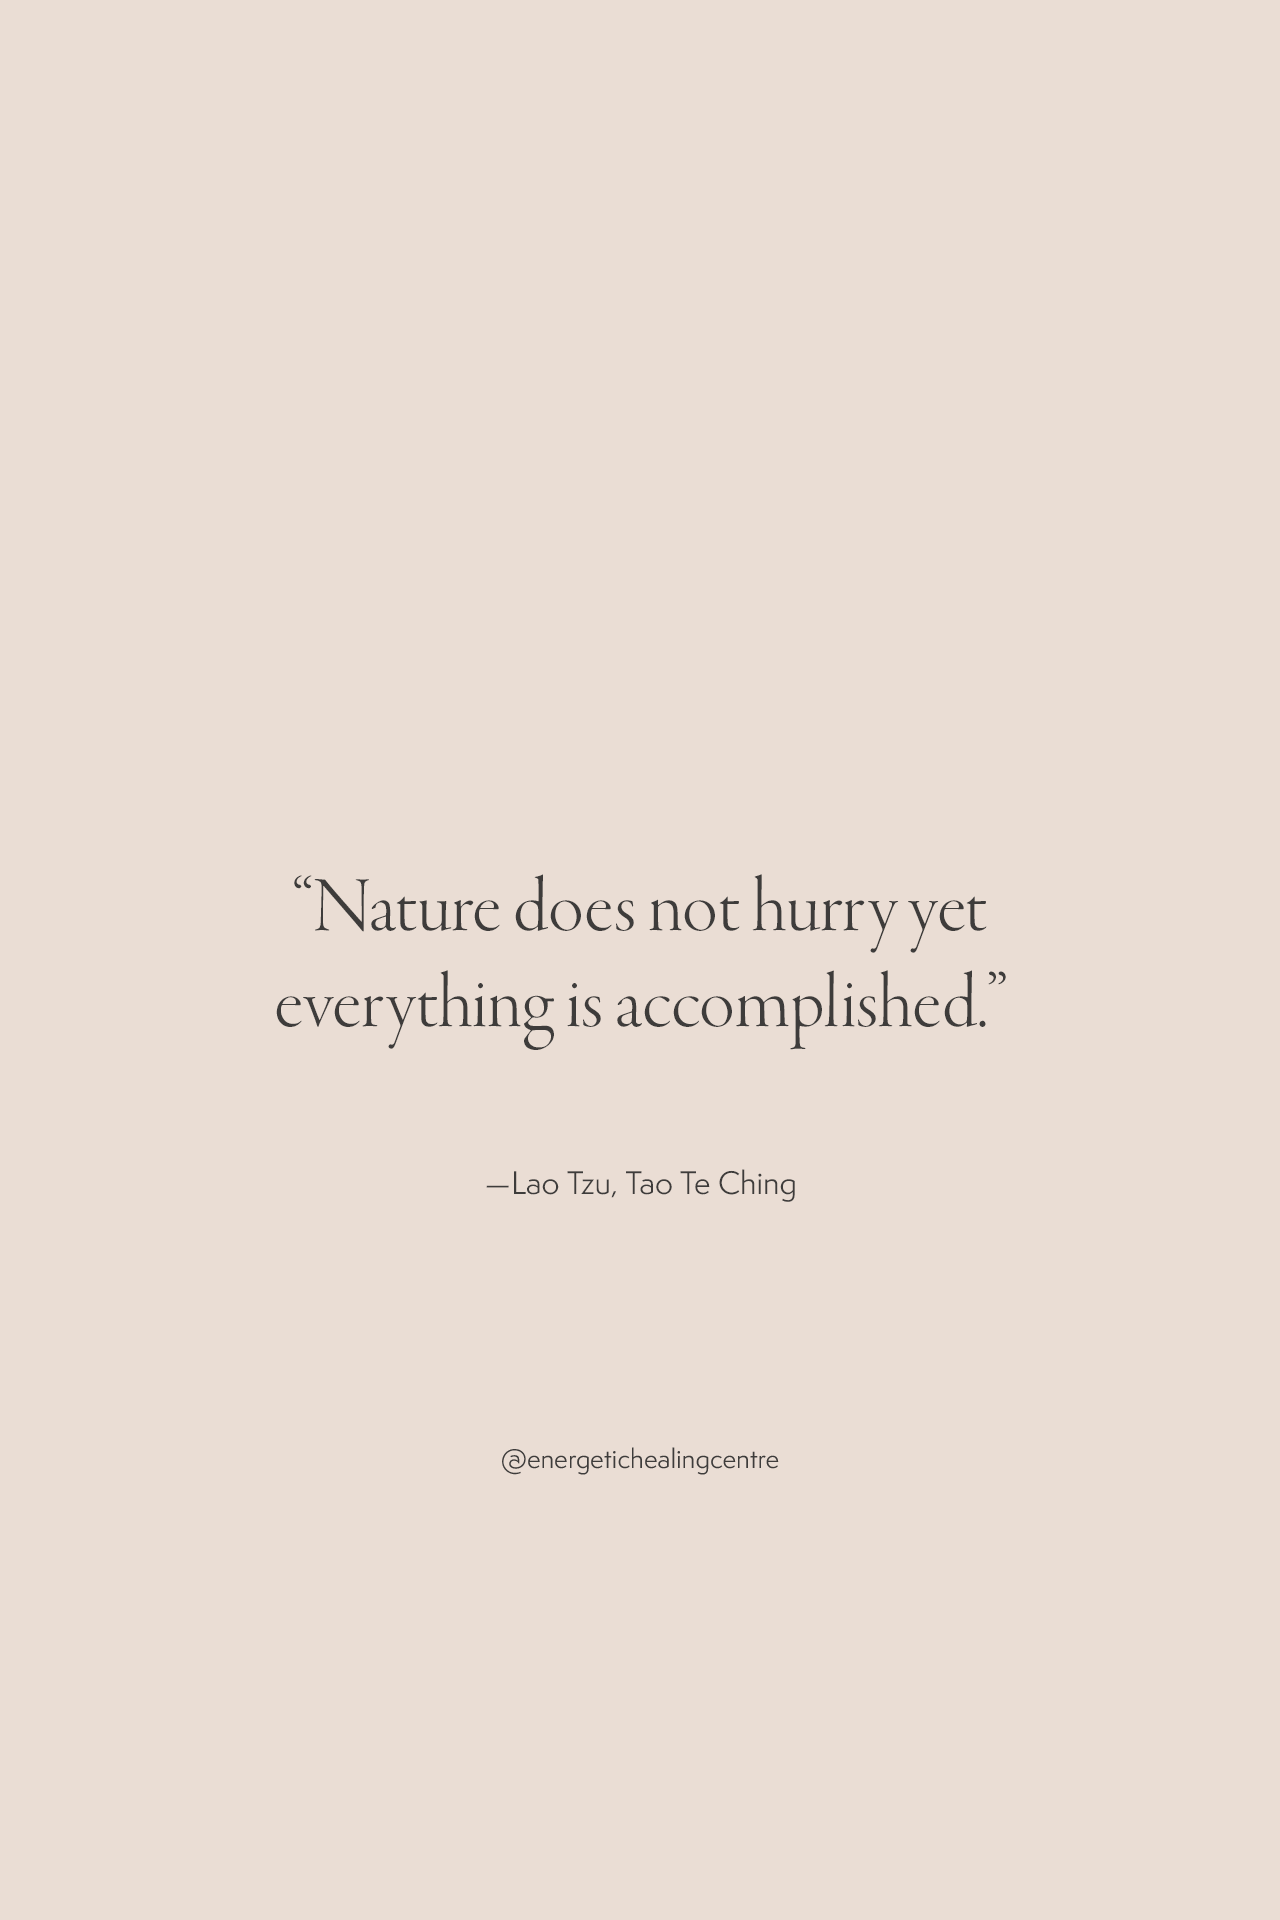 quote from Lao Tzu, Tao Te Ching about having patience